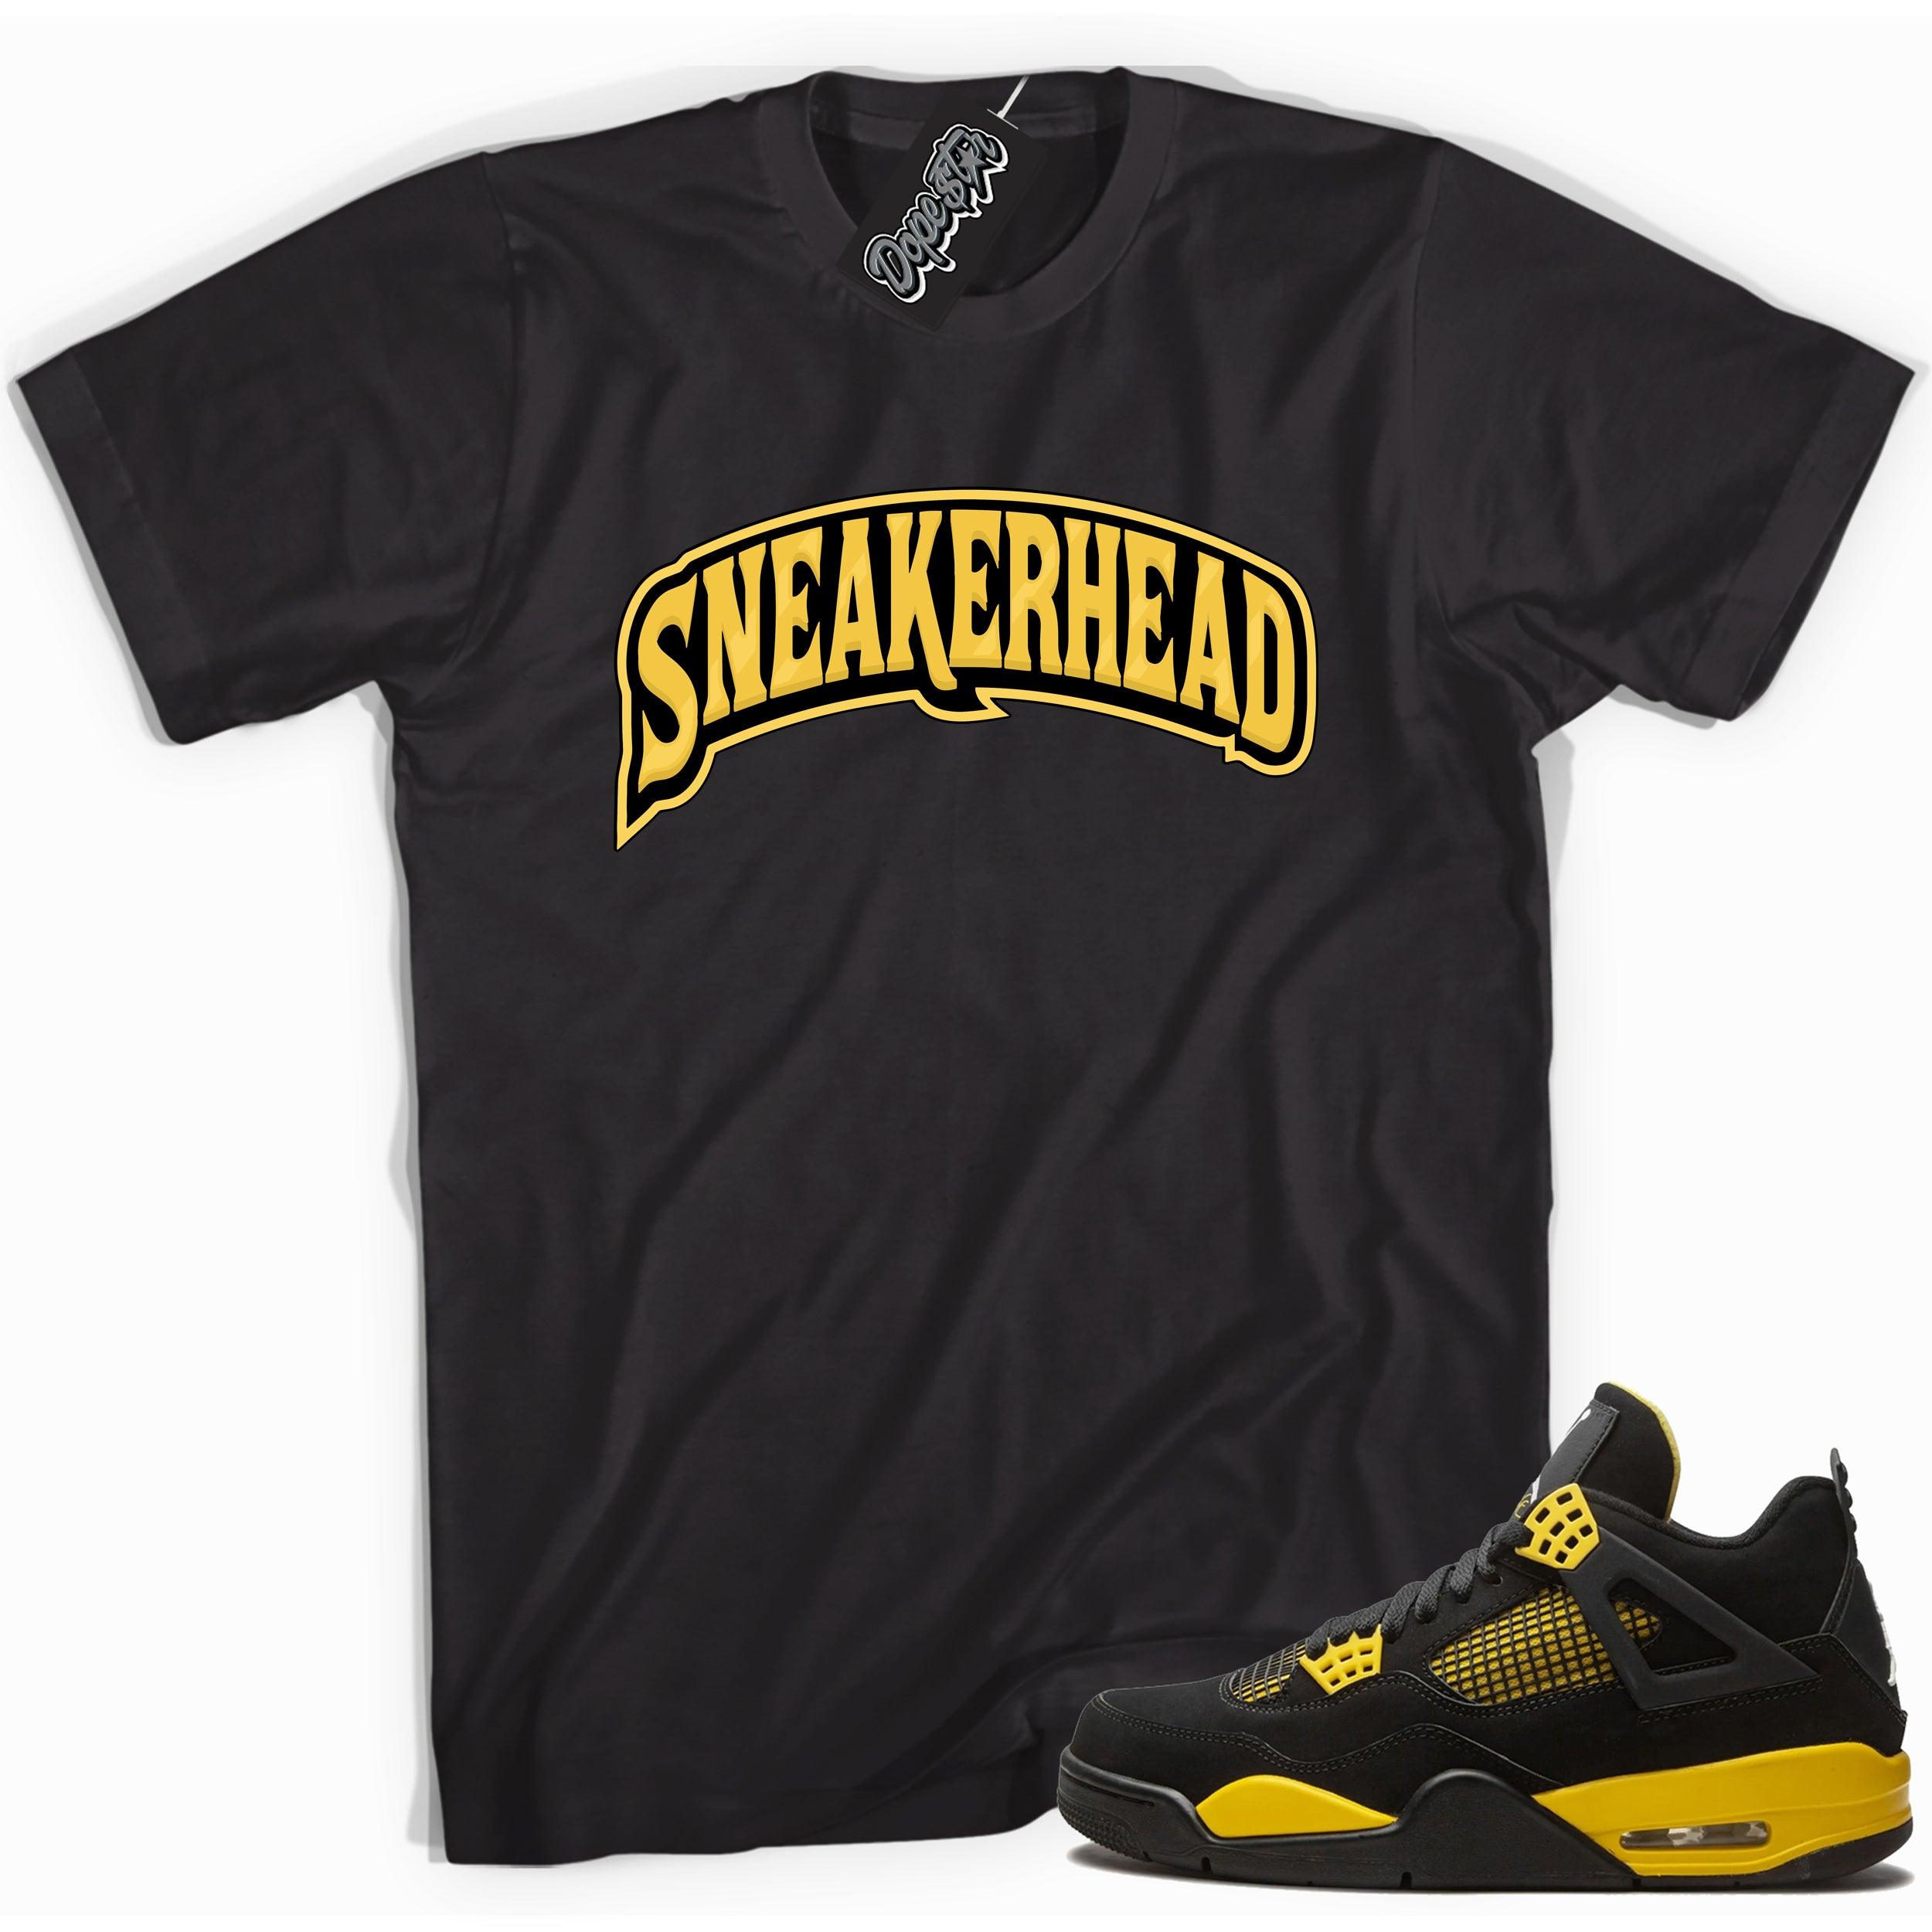 Cool black graphic tee with 'sneakerhead' print, that perfectly matches  Air Jordan 4 Thunder sneakers